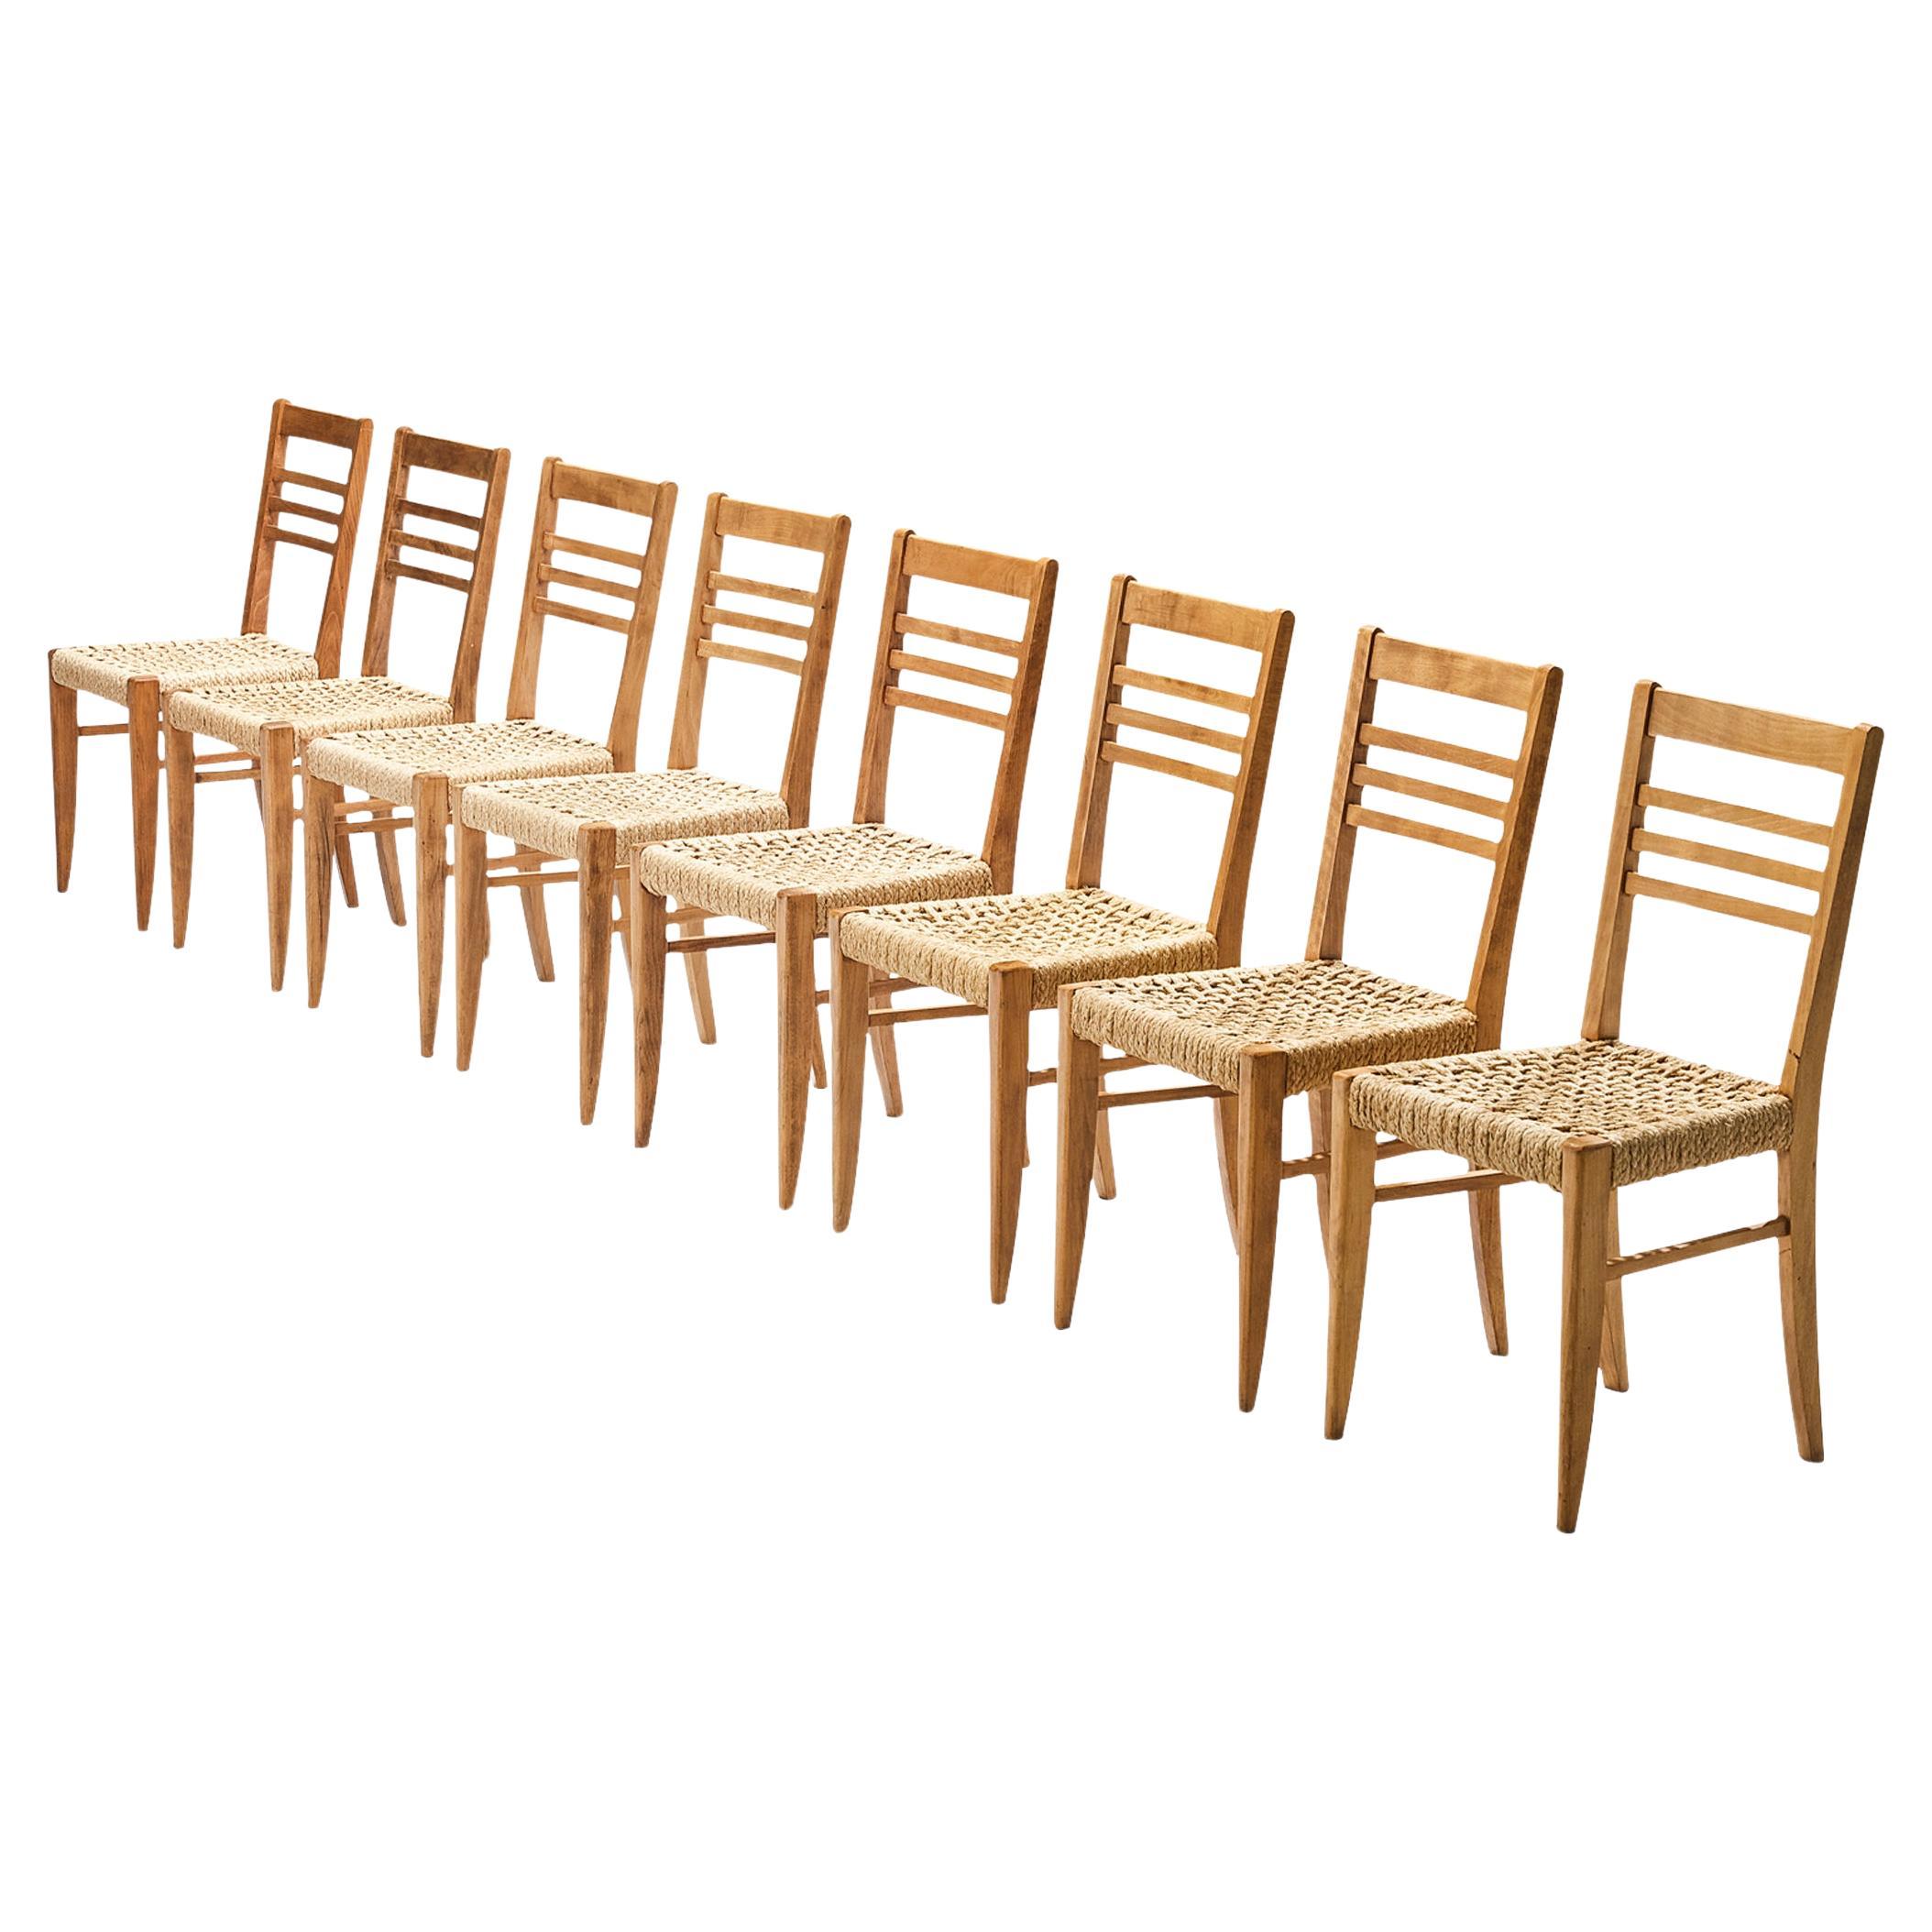 Adrien Audoux & Frida Minet Set of Eight Dining Chairs in Braided Hemp  For Sale